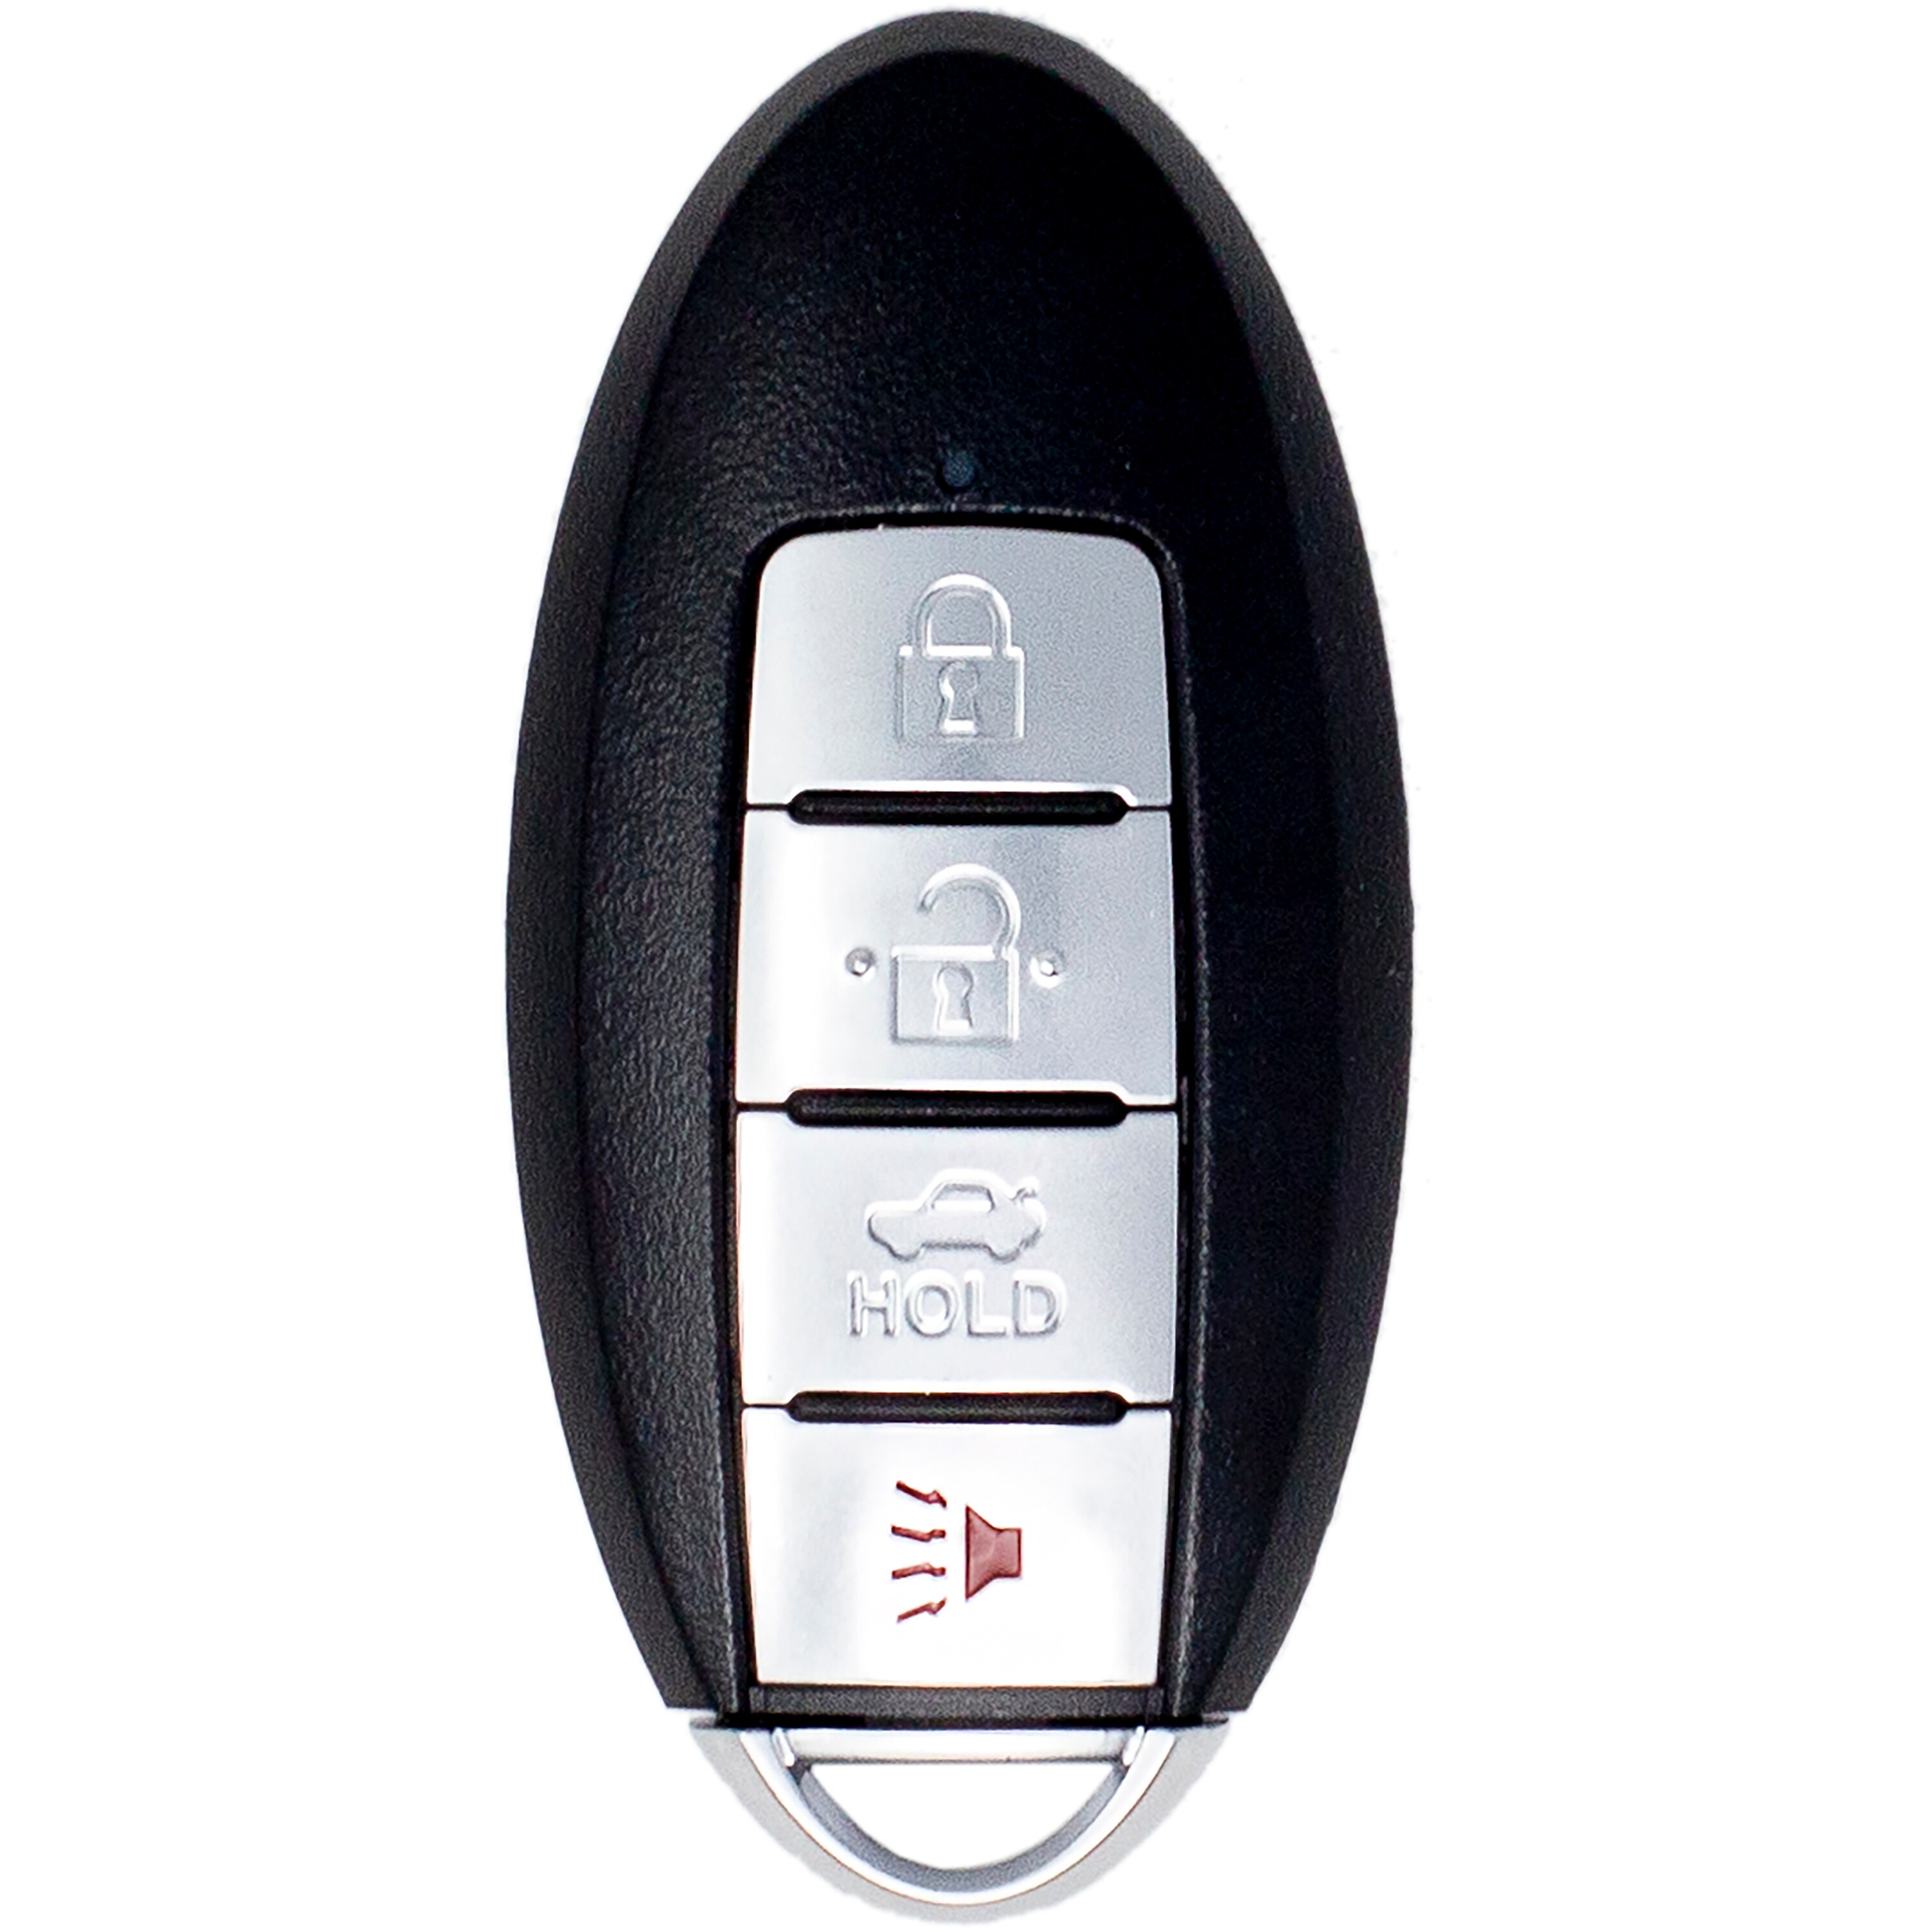 Replacement Uncut Key with Chip for Nissan Smart key 